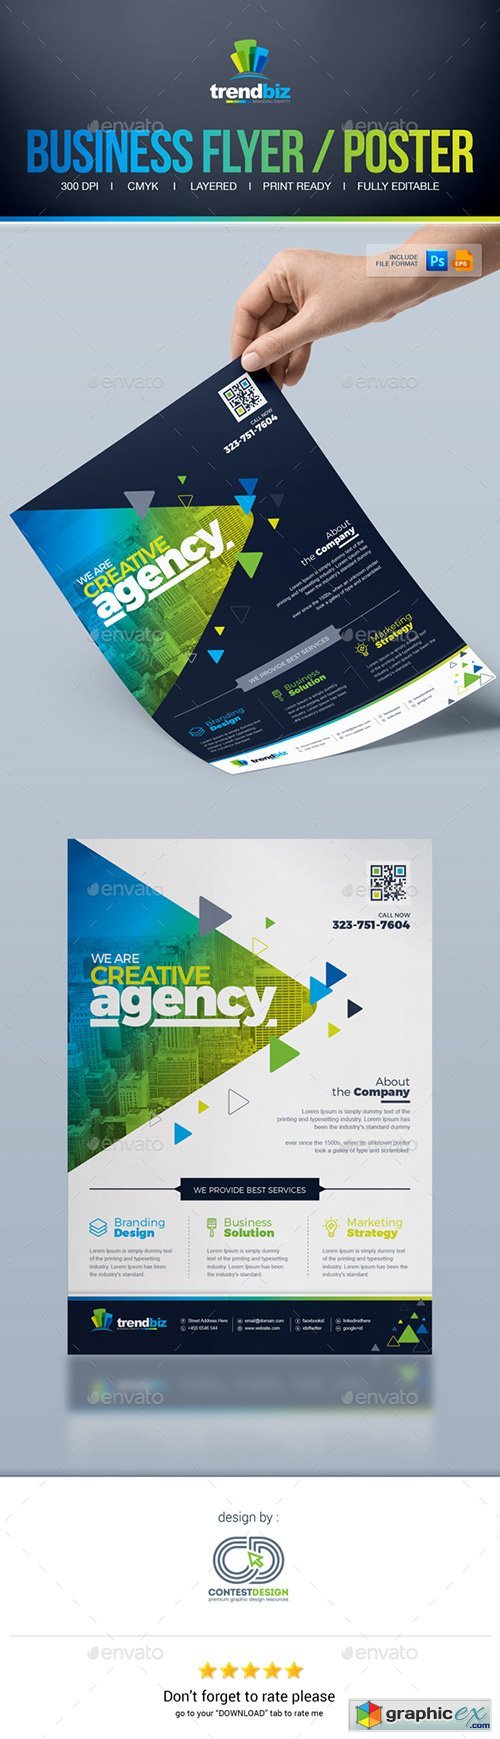 Corporate Business Flyer / Poster Advertising Template